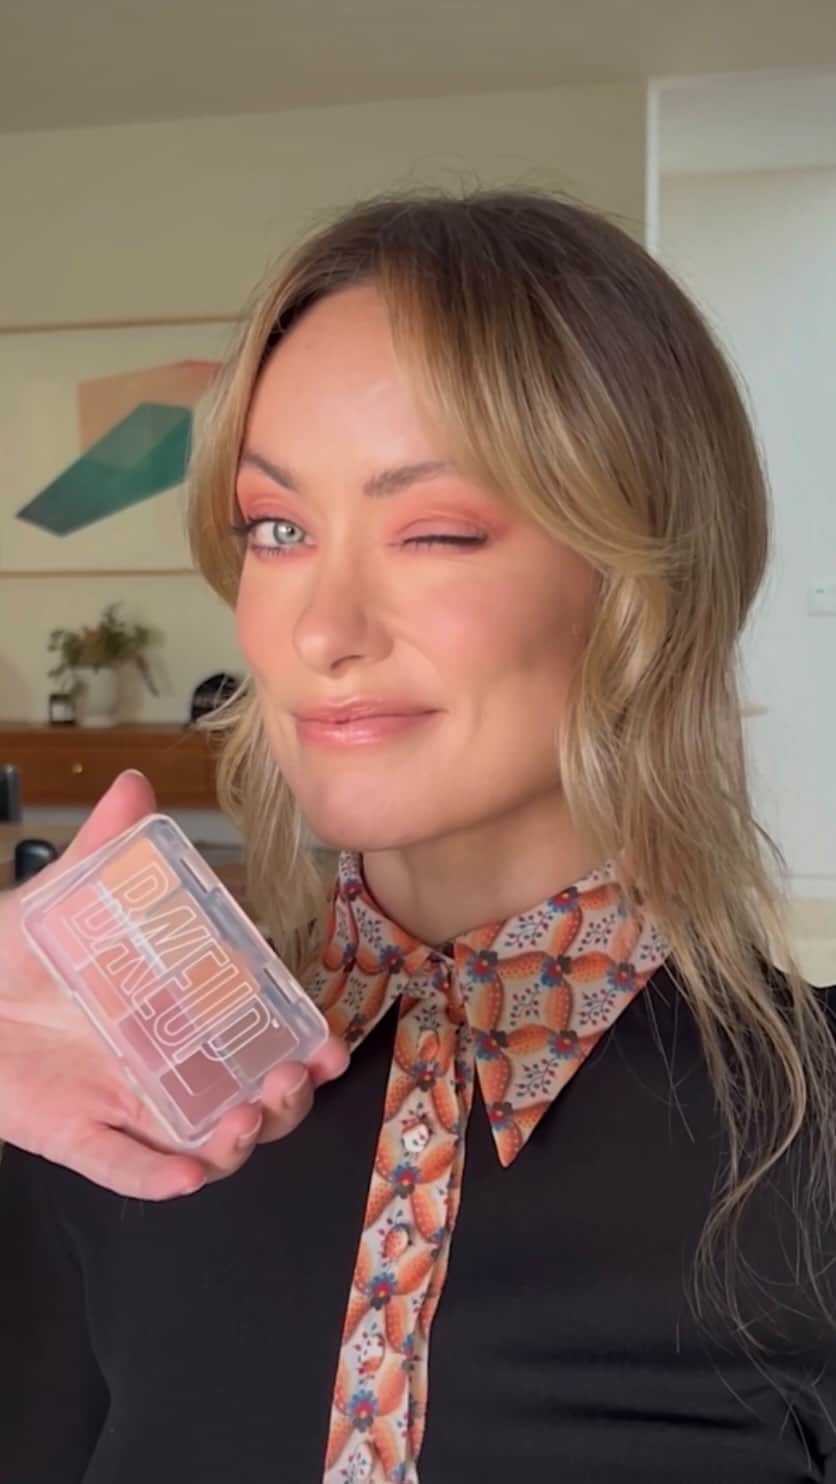 JO BAKERのインスタグラム：「O L I V I A • W I L D E 🇺🇸 Warm, cosy, seductive tones… on #oliviawilde last night. A classic #roseecrinpowderblush @welovecoco lip #muse lipgloss @lisaeldridgemakeup and a @bakeupbeauty 2024 sneak peak 👀✨‼️ Style @karlawelchstylist  Hair @barbdoeshair  Makeup by me #jobakermakeupartist using the above ❤️ #makeupoftheday #makeup #makeupartist #makeupaddict #makeuplover #makeuplook #autumnmakeup #fallmakeup #makeuptutorial #makeuplooks #warmtones #cozy #cosy」